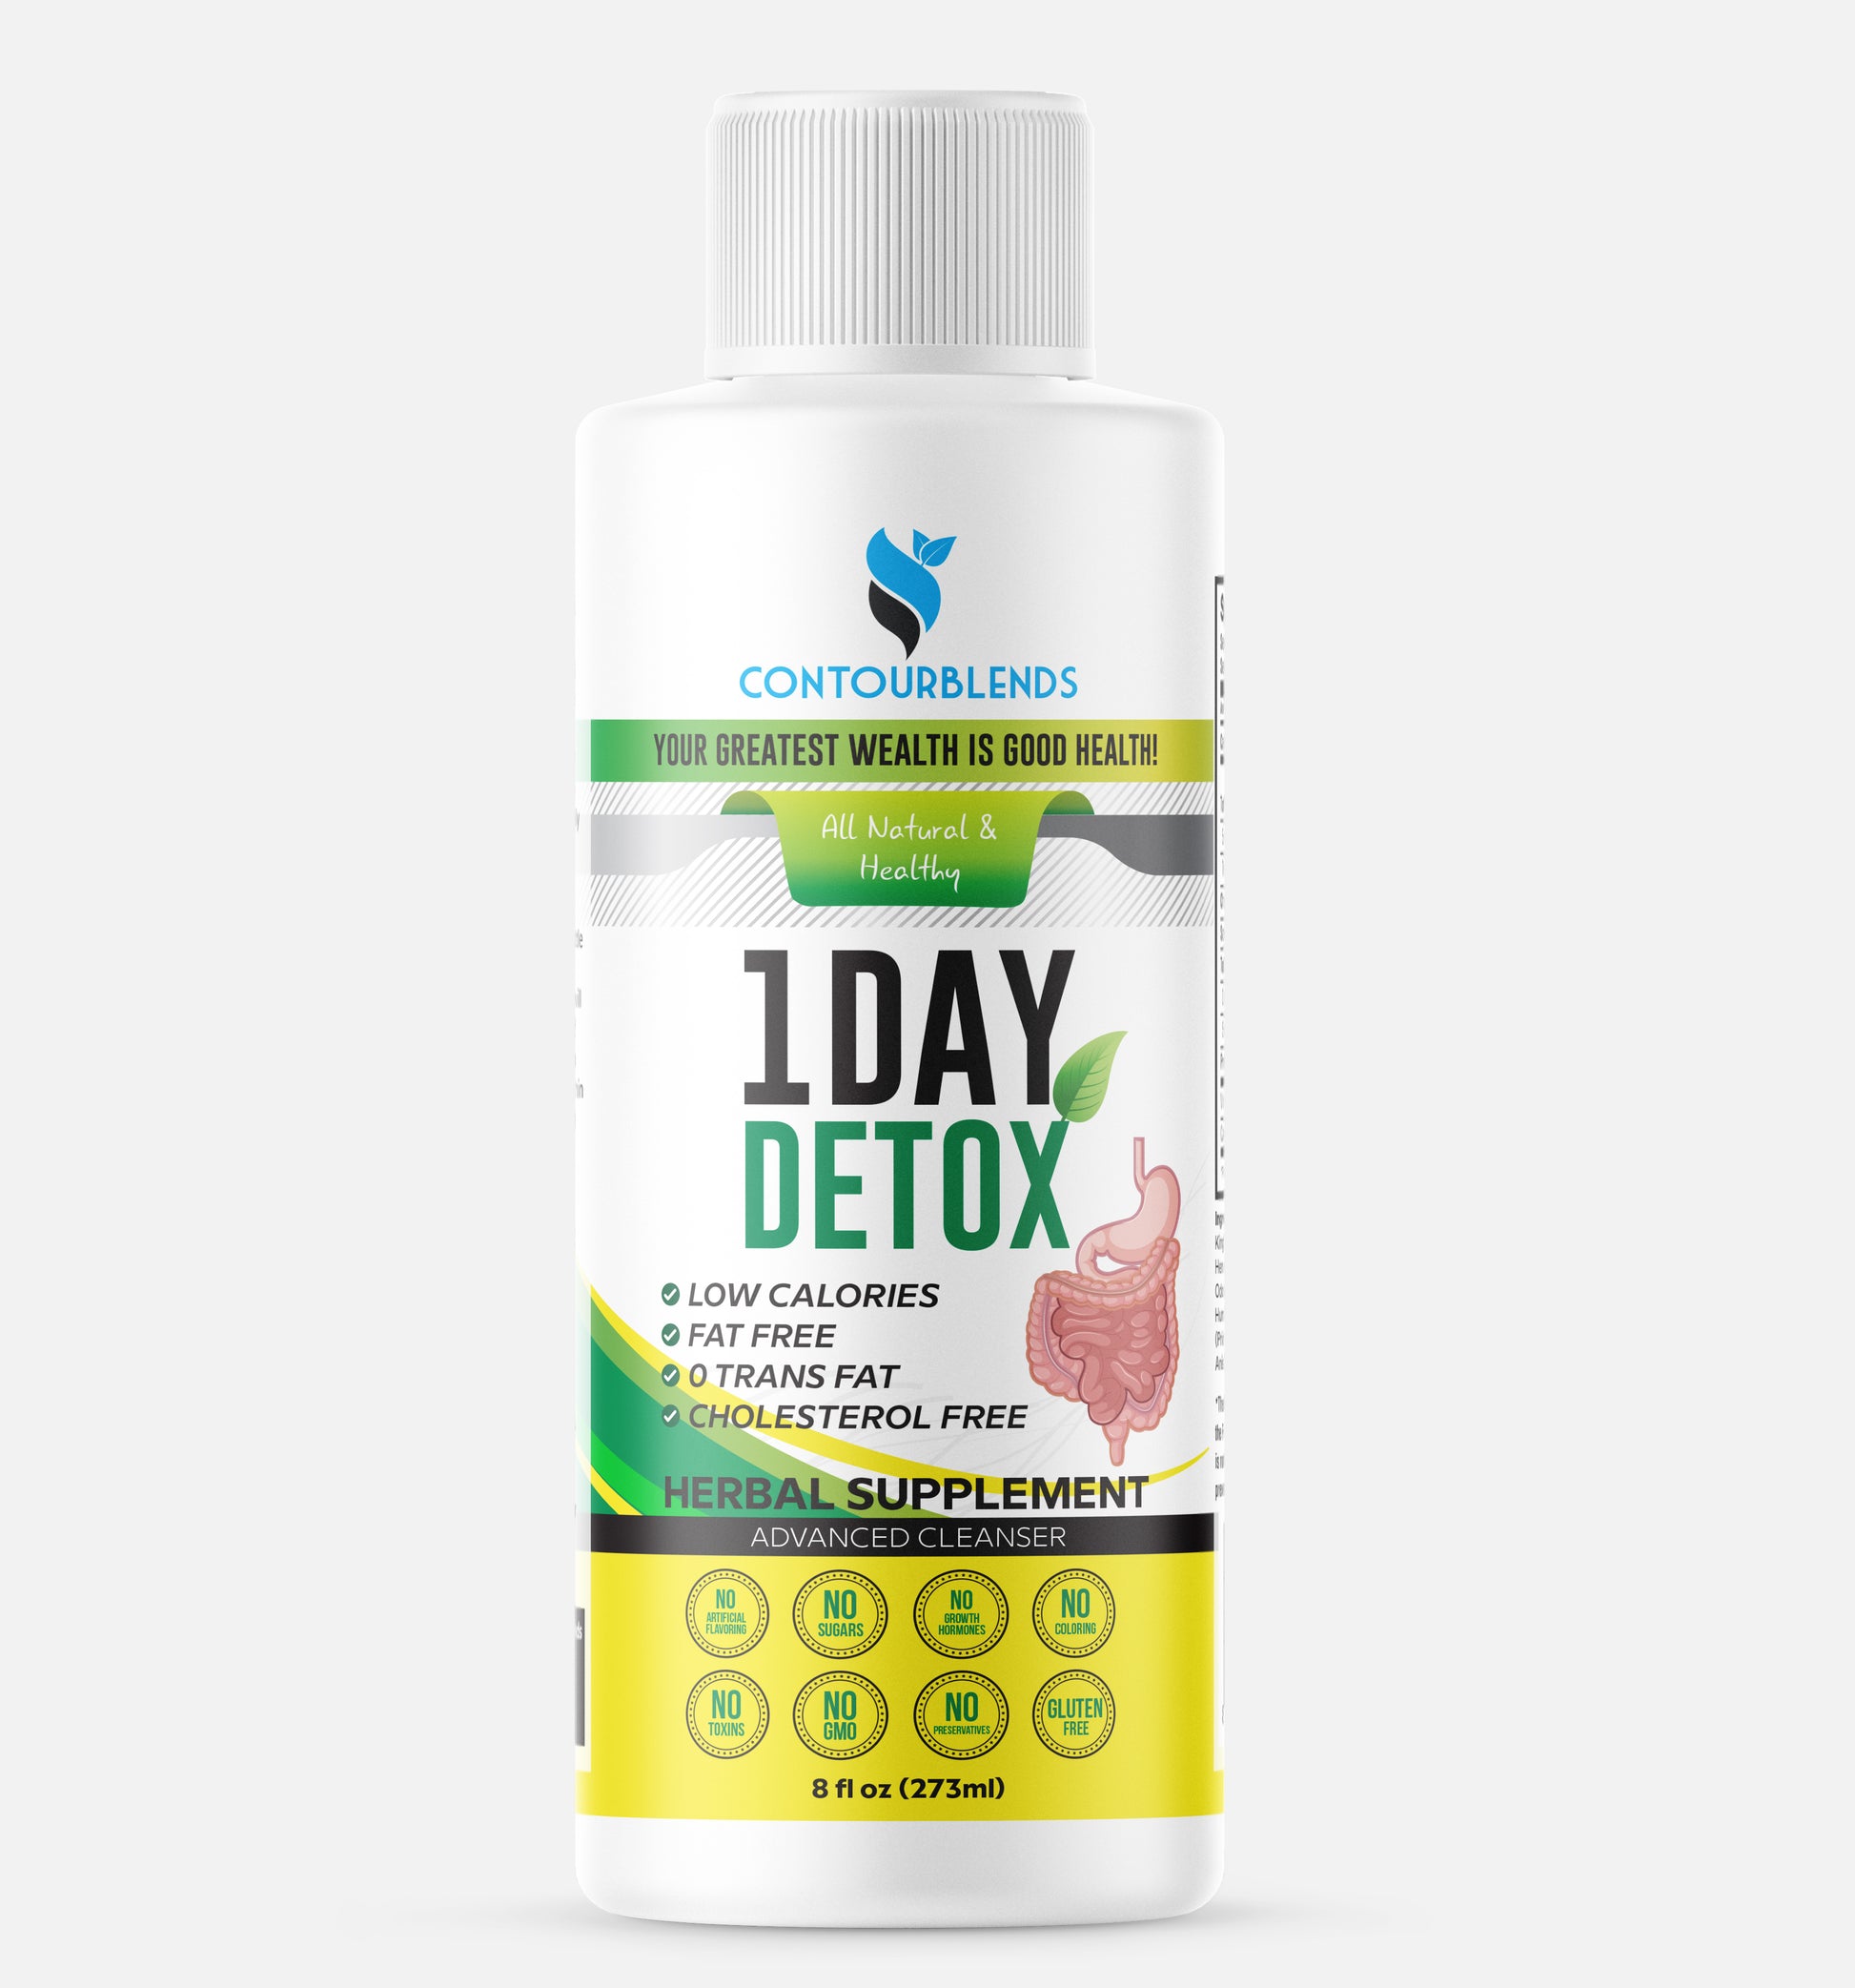 1 day colon detox in the USA. the most advance cleanser around that cleanse your colon, liver kidney and entire body.